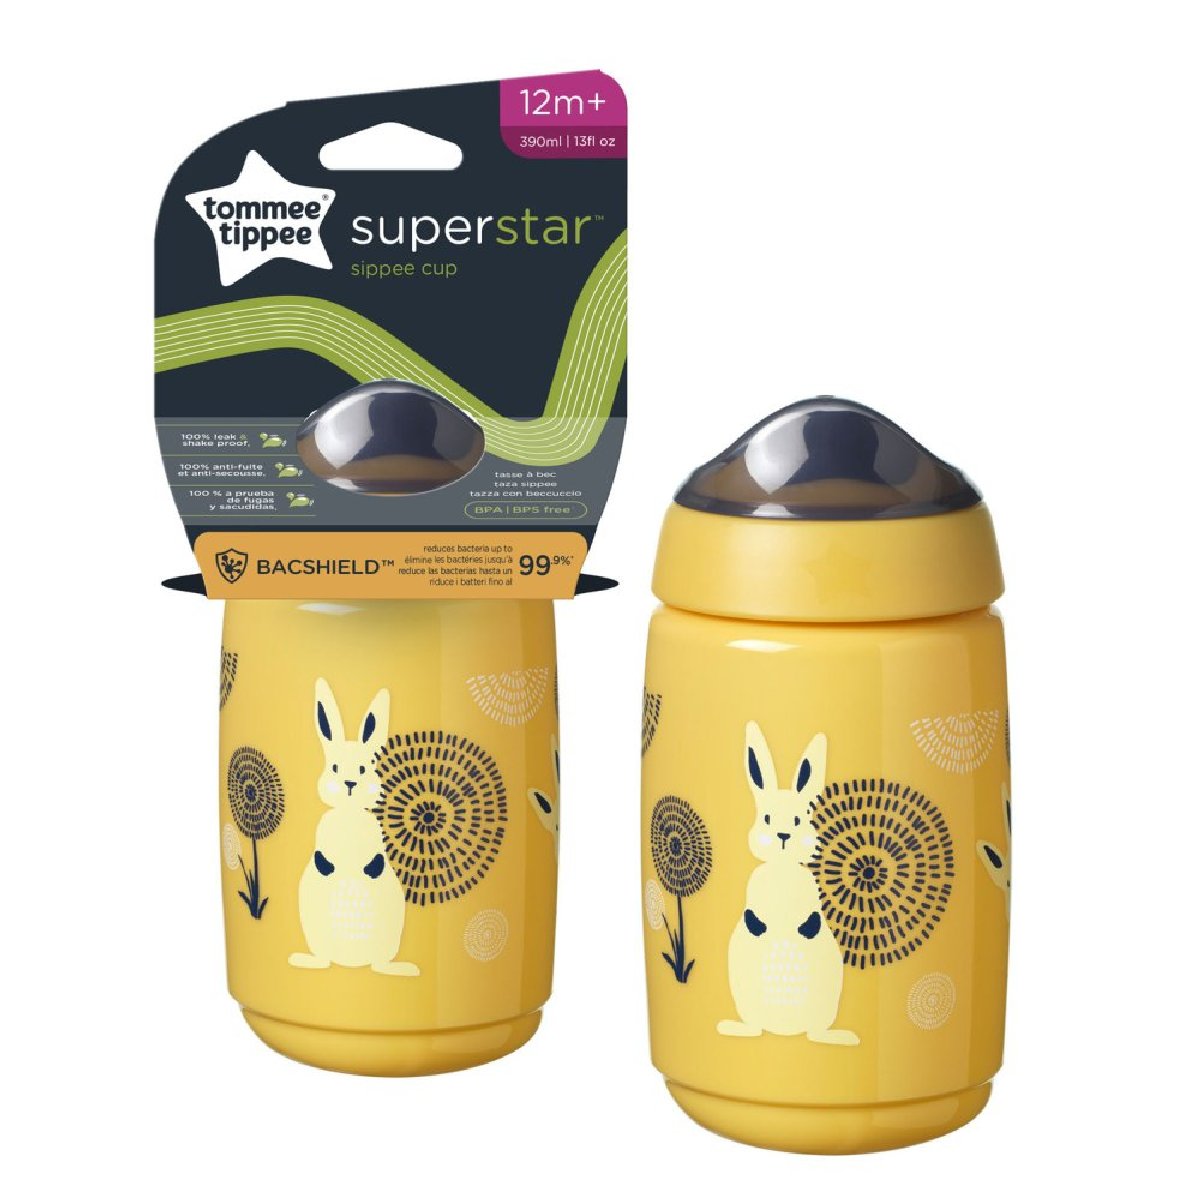 Tommee Tippee Insulated 9oz Non-Spill Portable Toddler Cup - 2pk